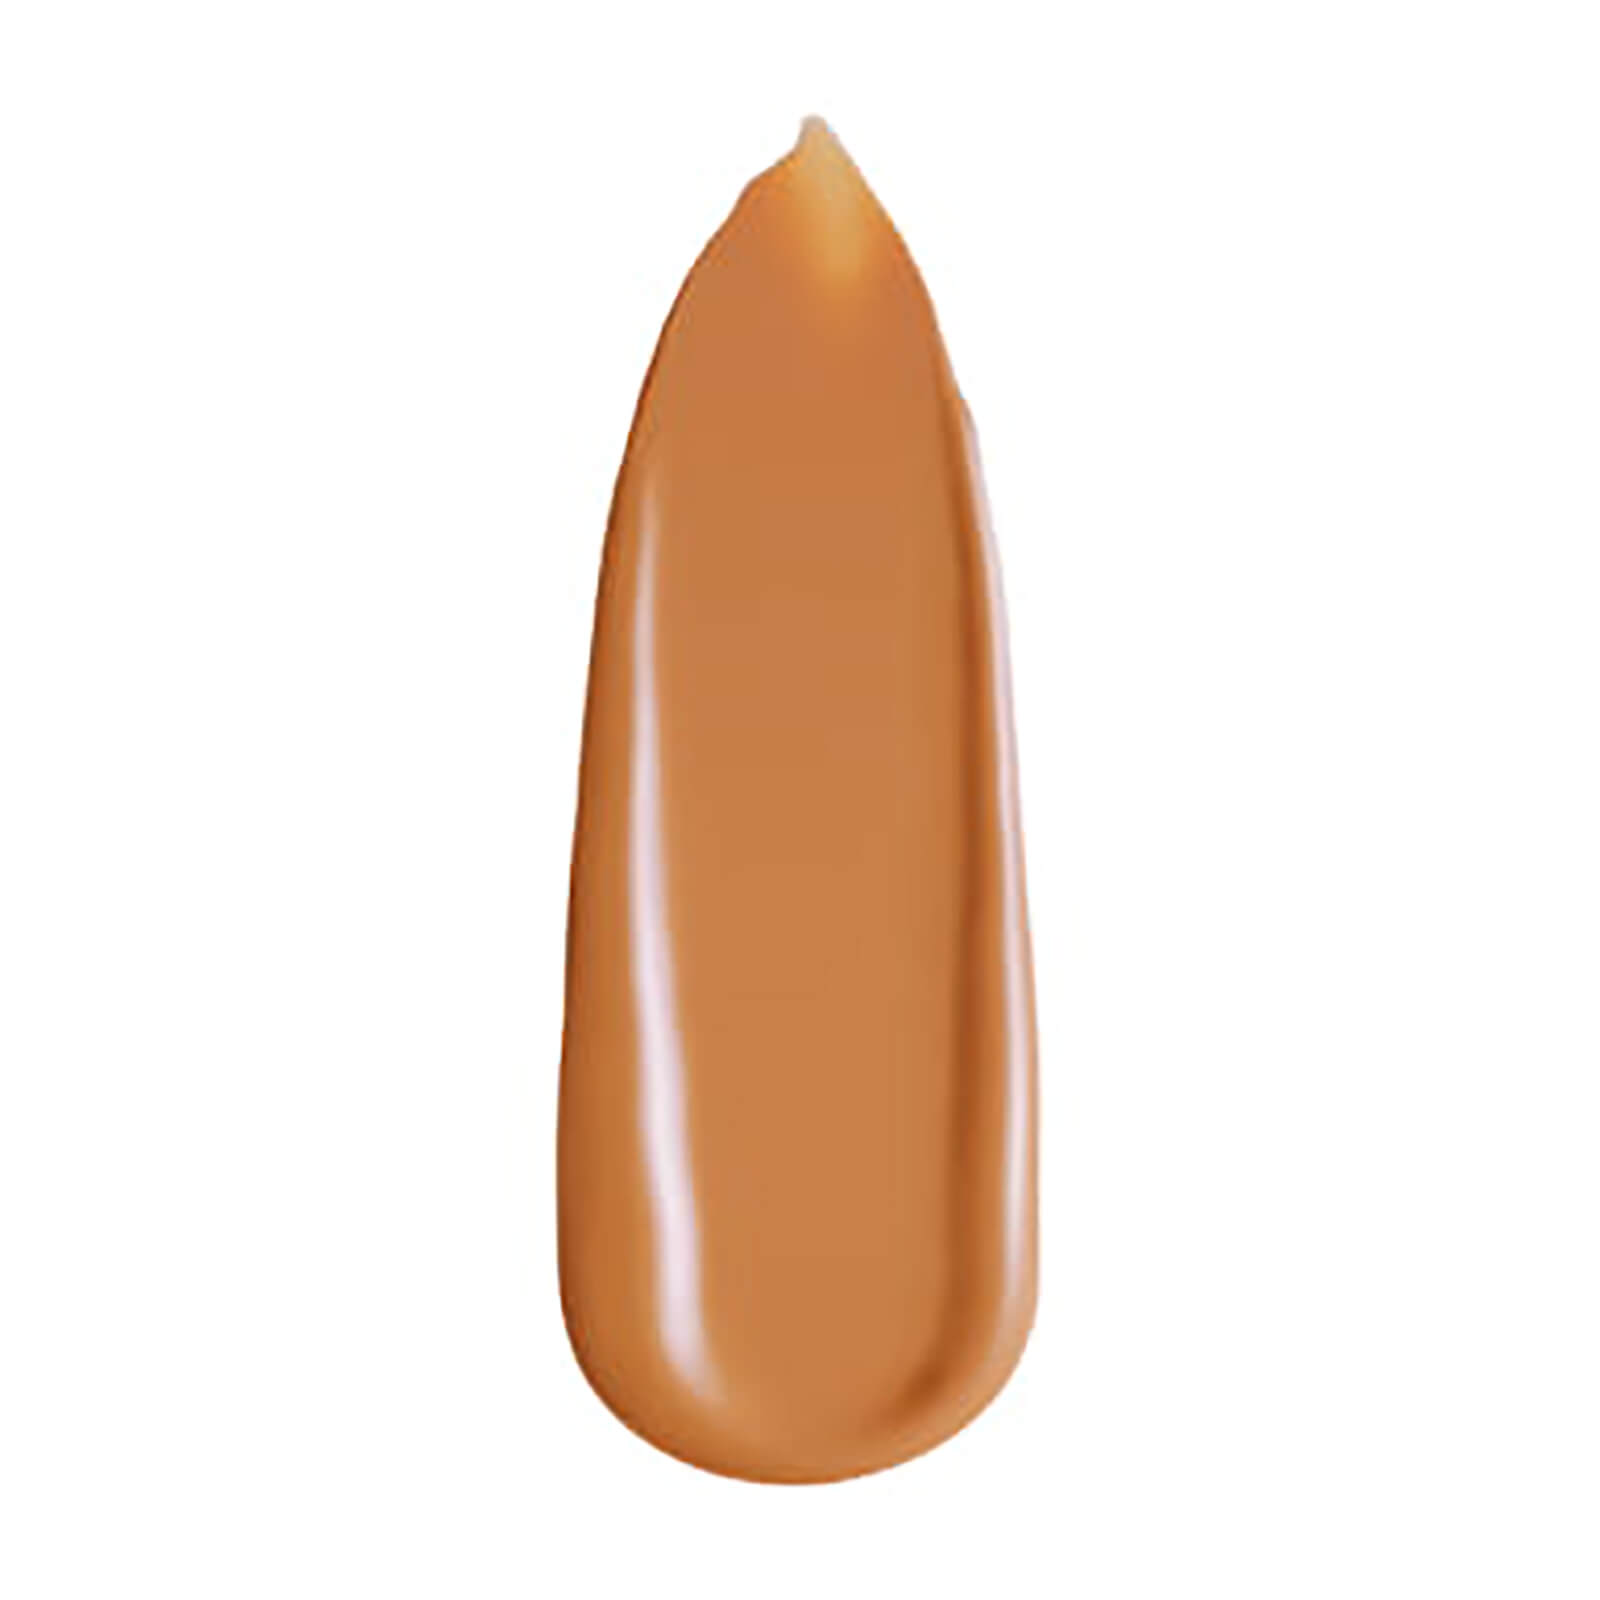 Clinique Even Better Glow™ Light Reflecting Makeup SPF15 30ml (Various Shades) - 68 Brulee